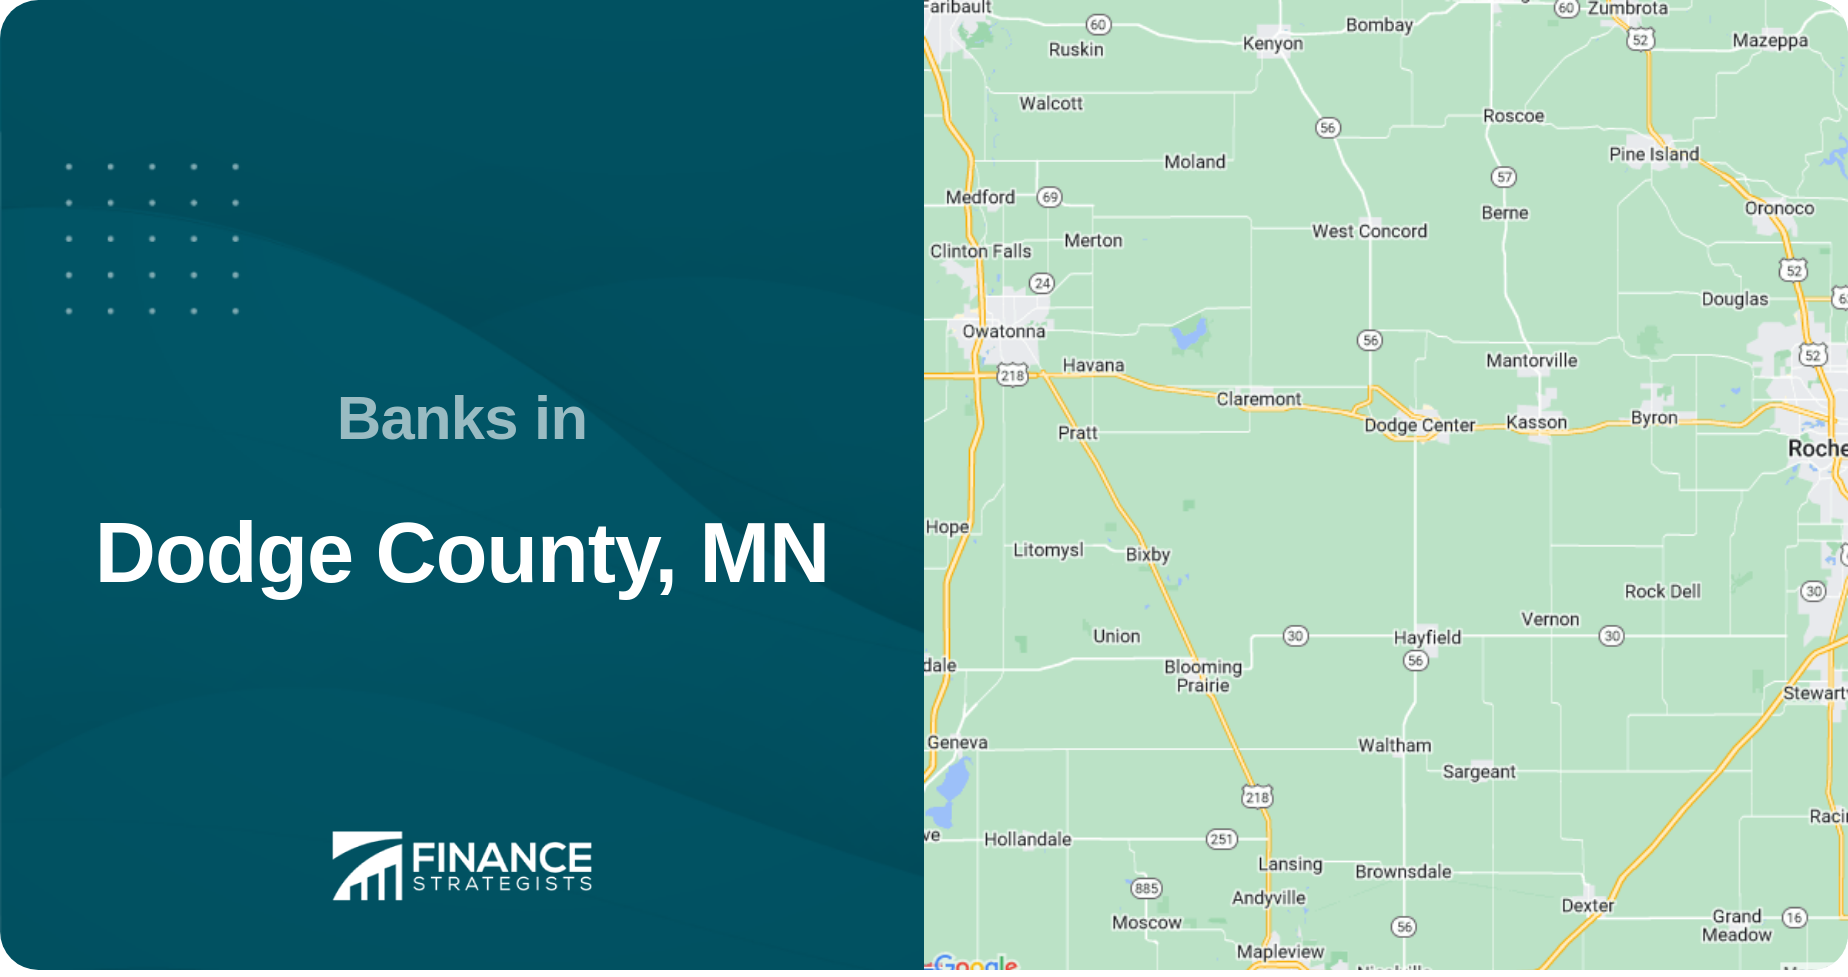 Banks in Dodge County, MN